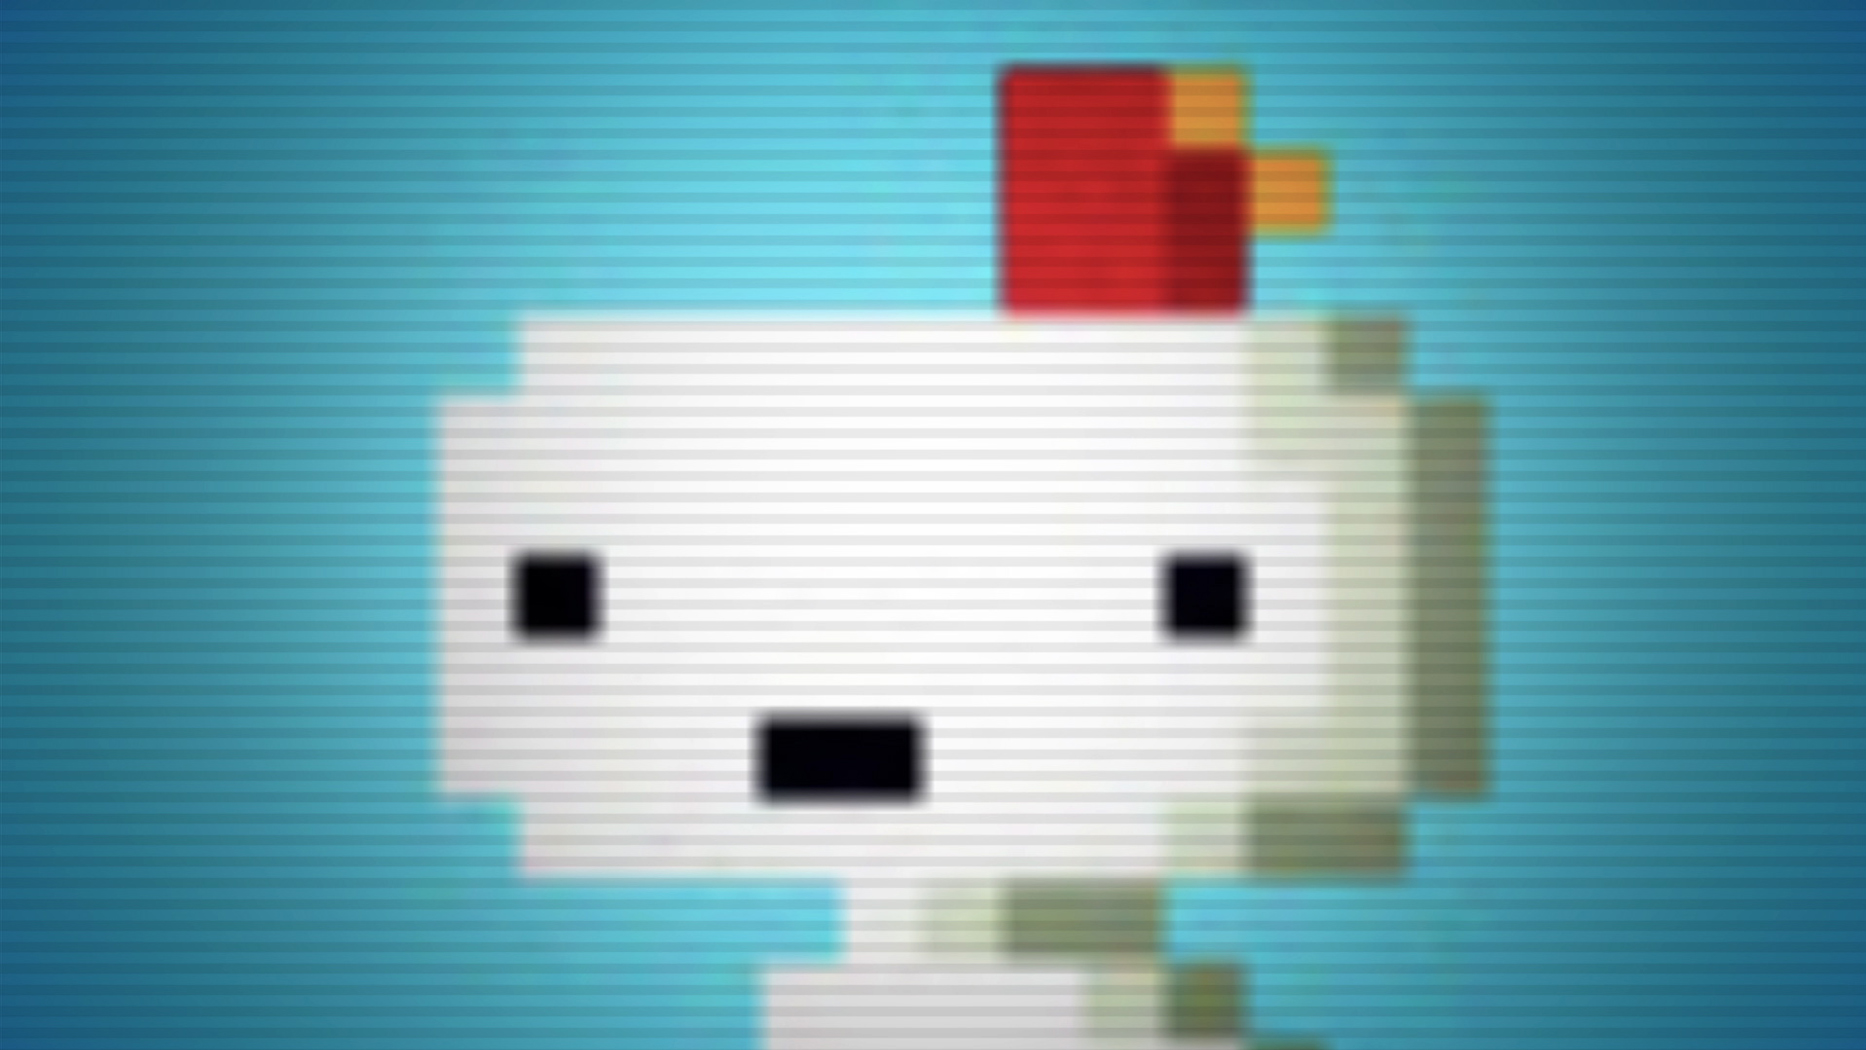 Fez Coming to Other Platforms in 2013